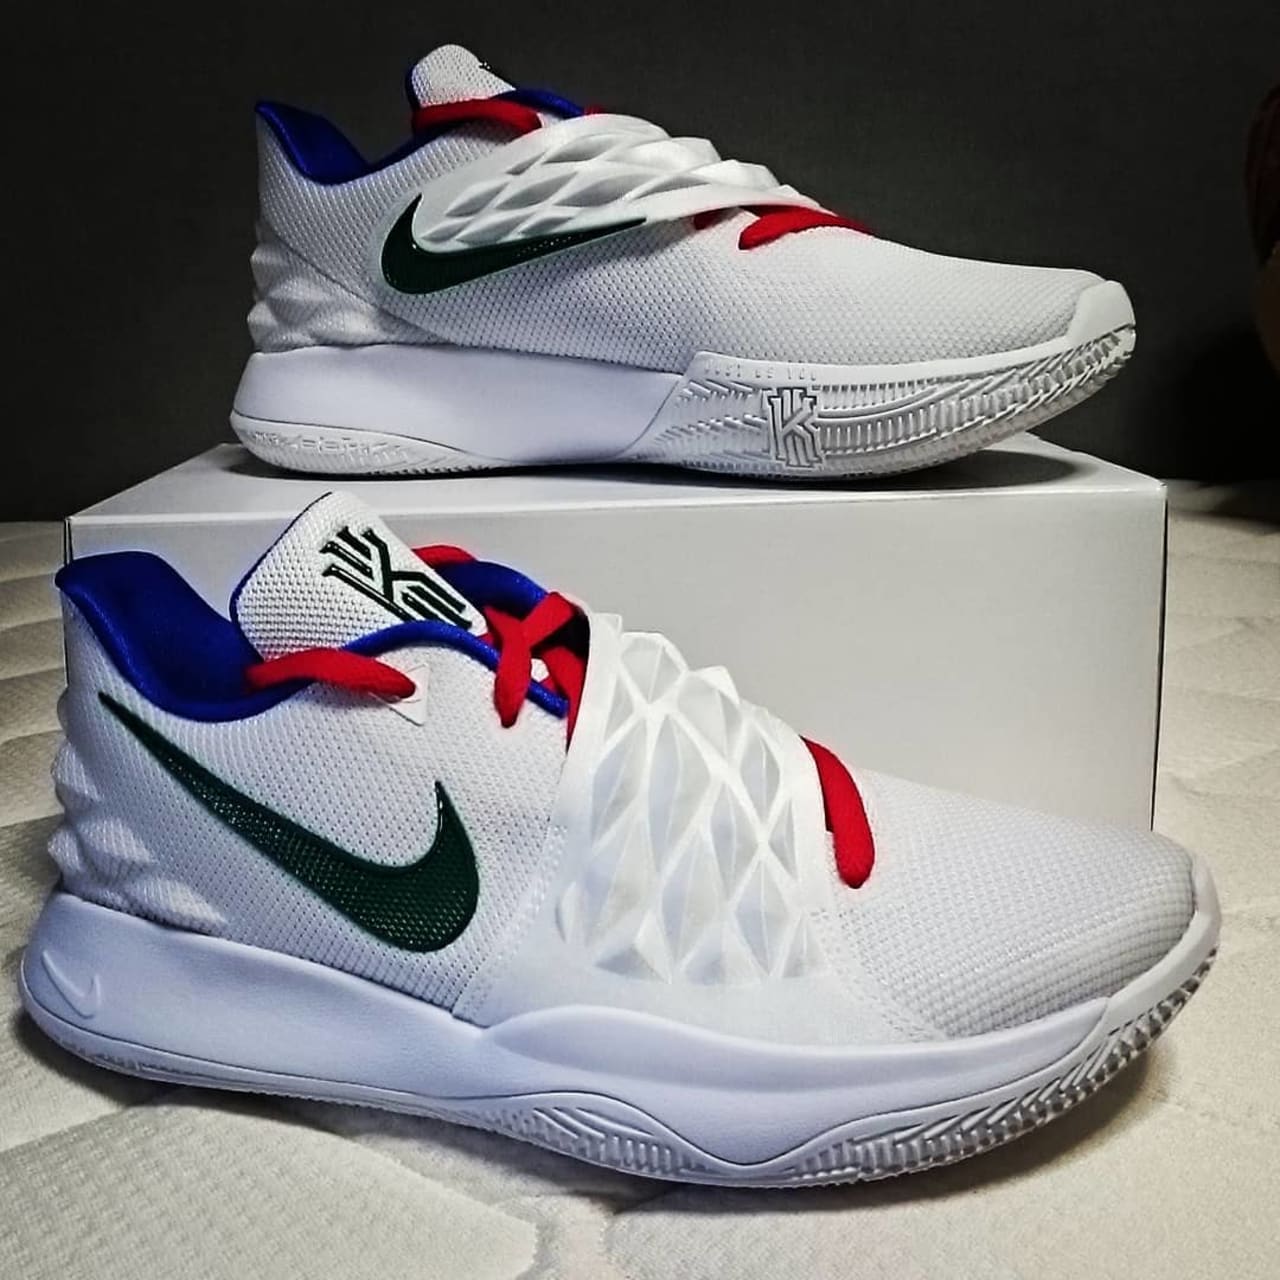 kyrie low id shoes